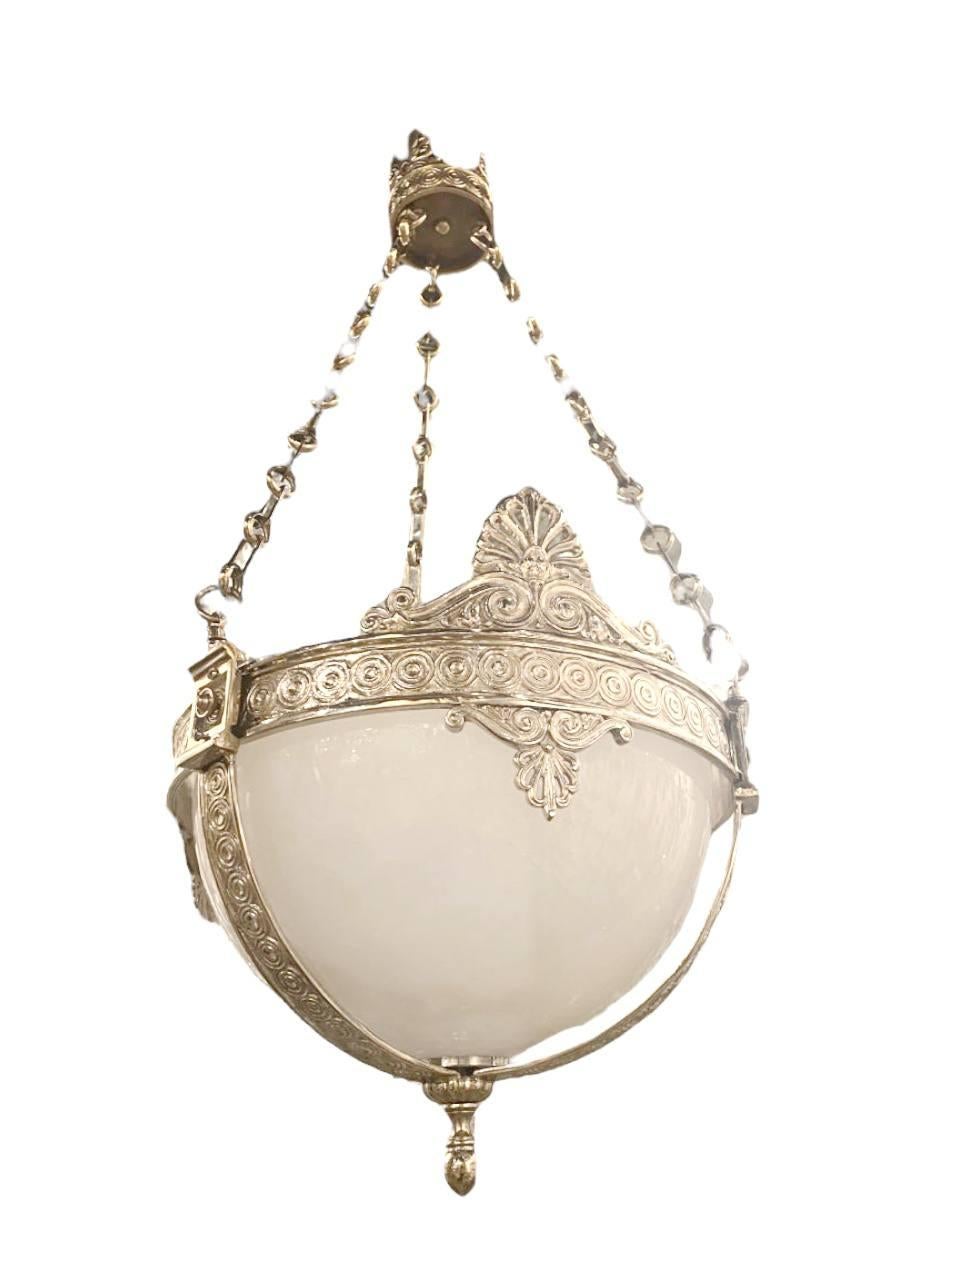 American 1920s Caldwell Silver Plated Light Fixture with Opaline glass For Sale